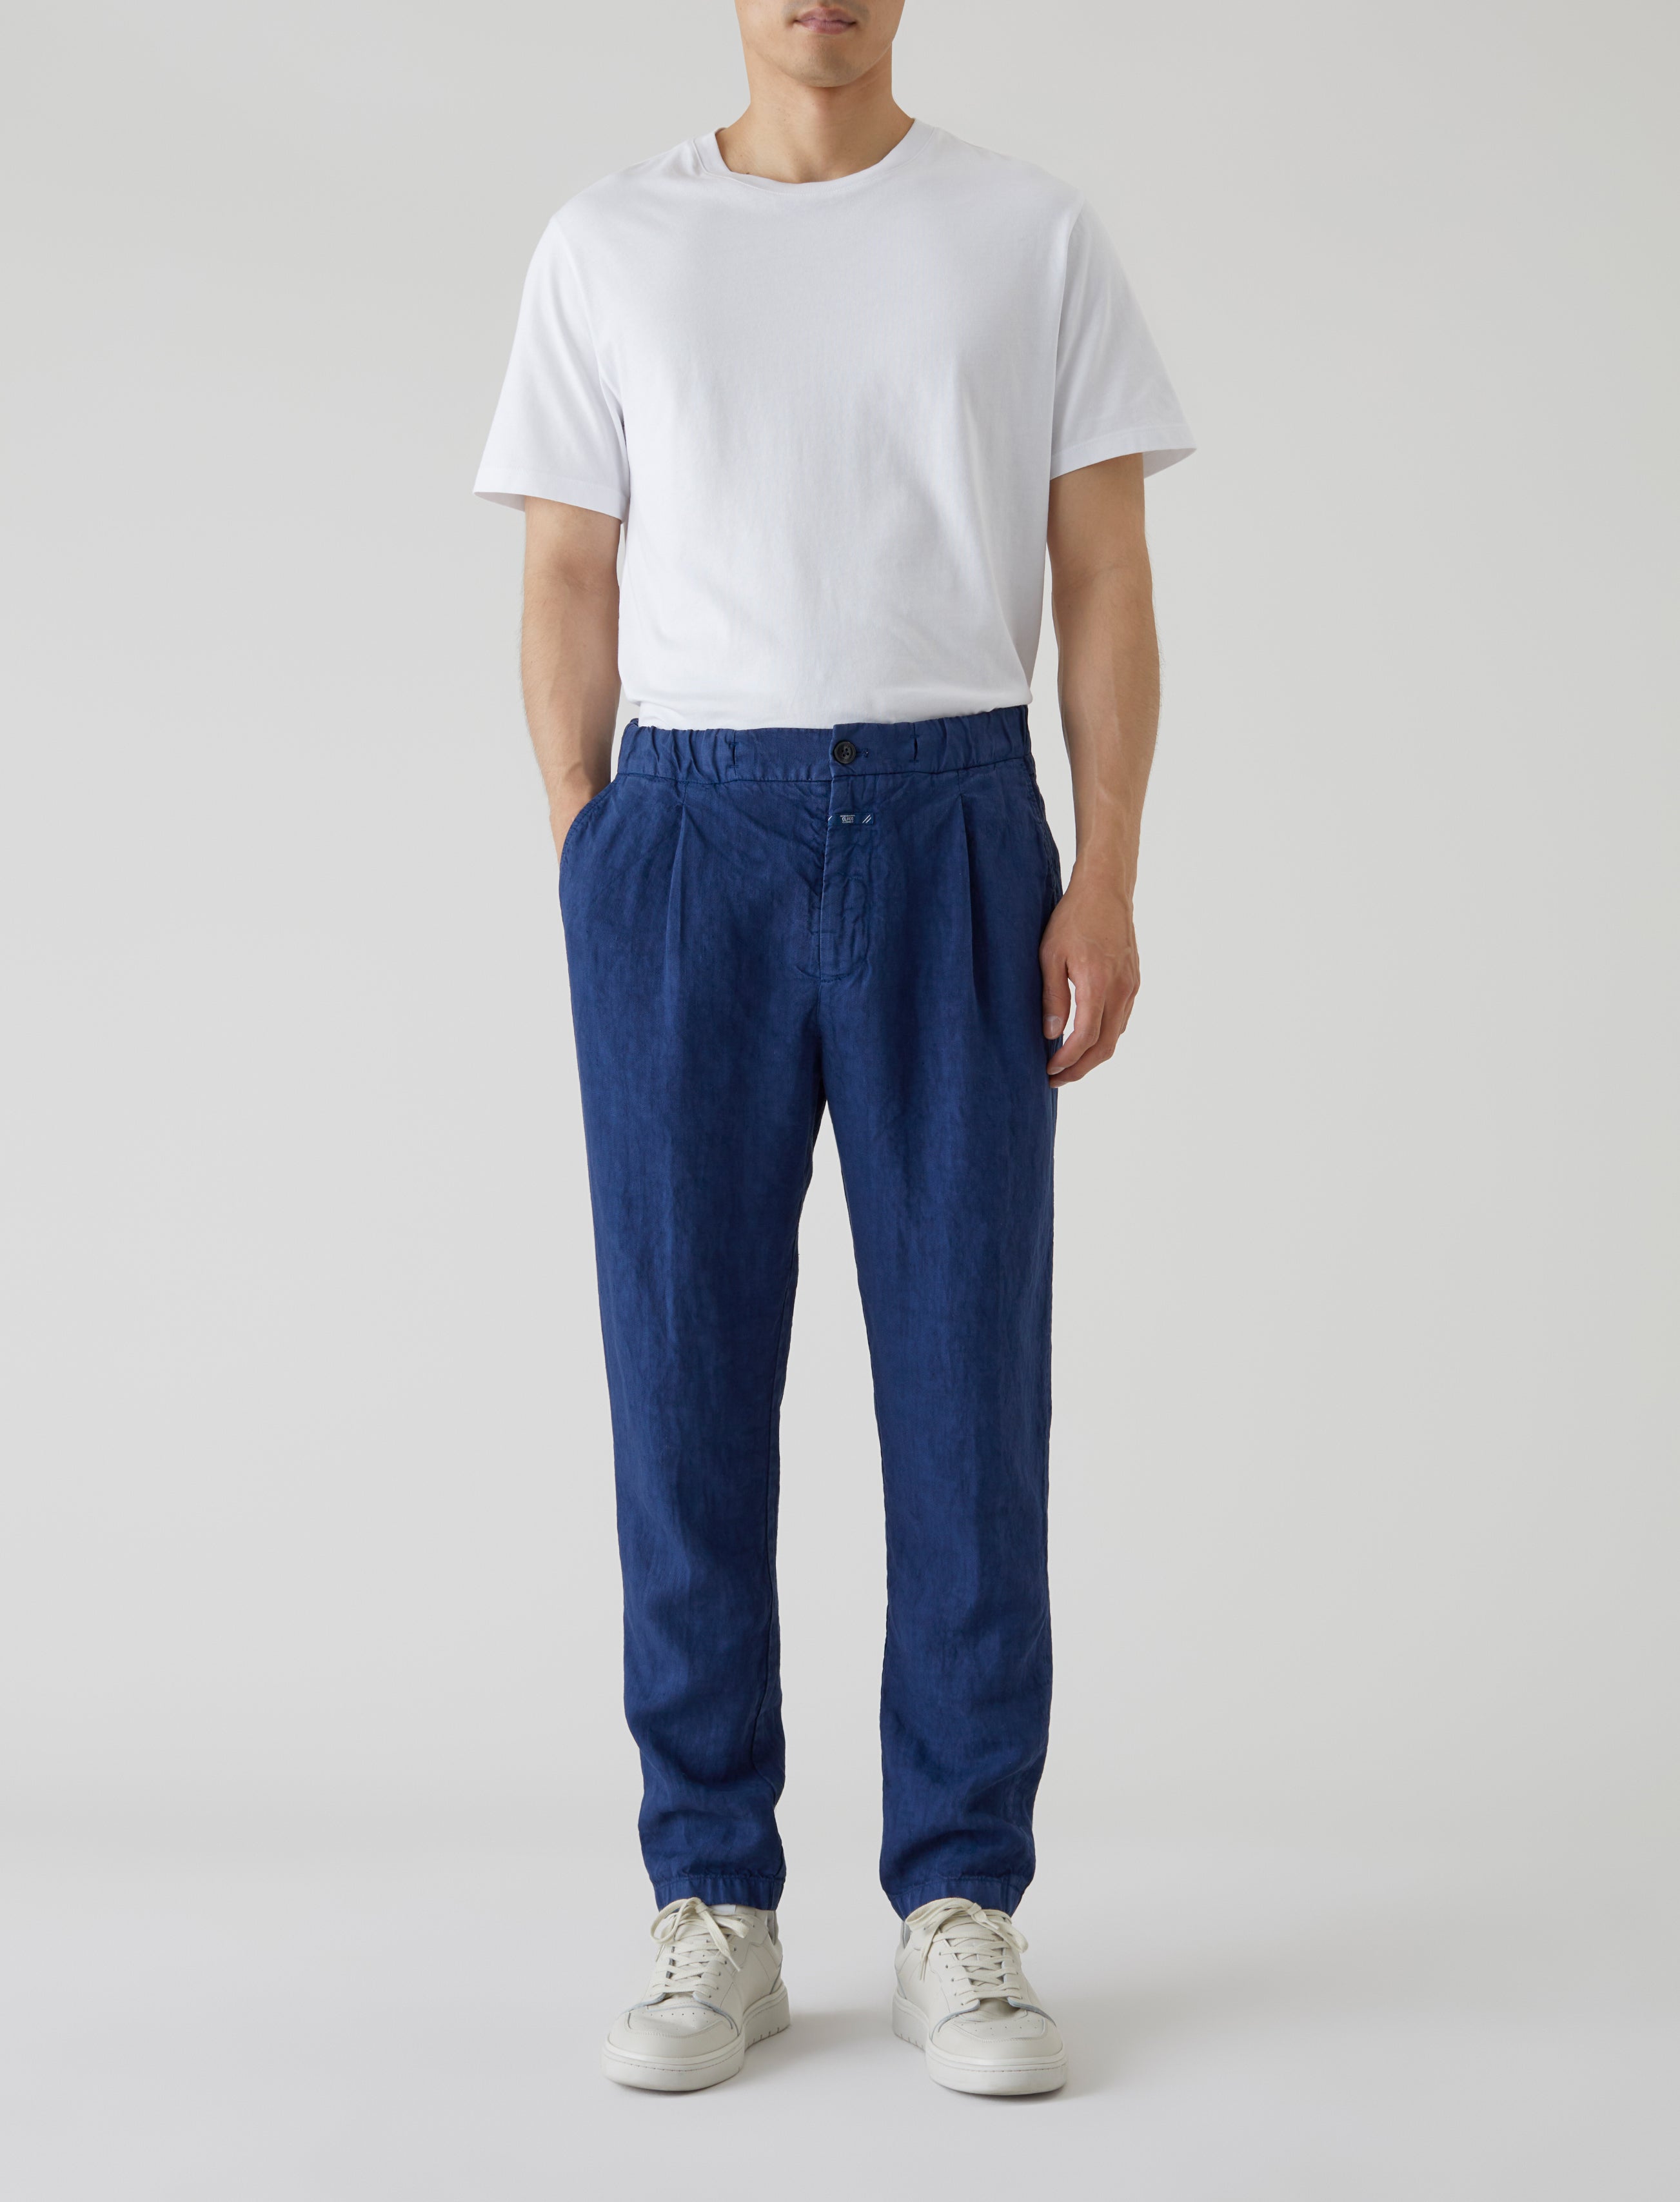 CLOSED-OUTLET-SALE-STYLE-NAME-VIGO-TAPERED-PANTS-Hosen-ARCHIVE-COLLECTION.jpg